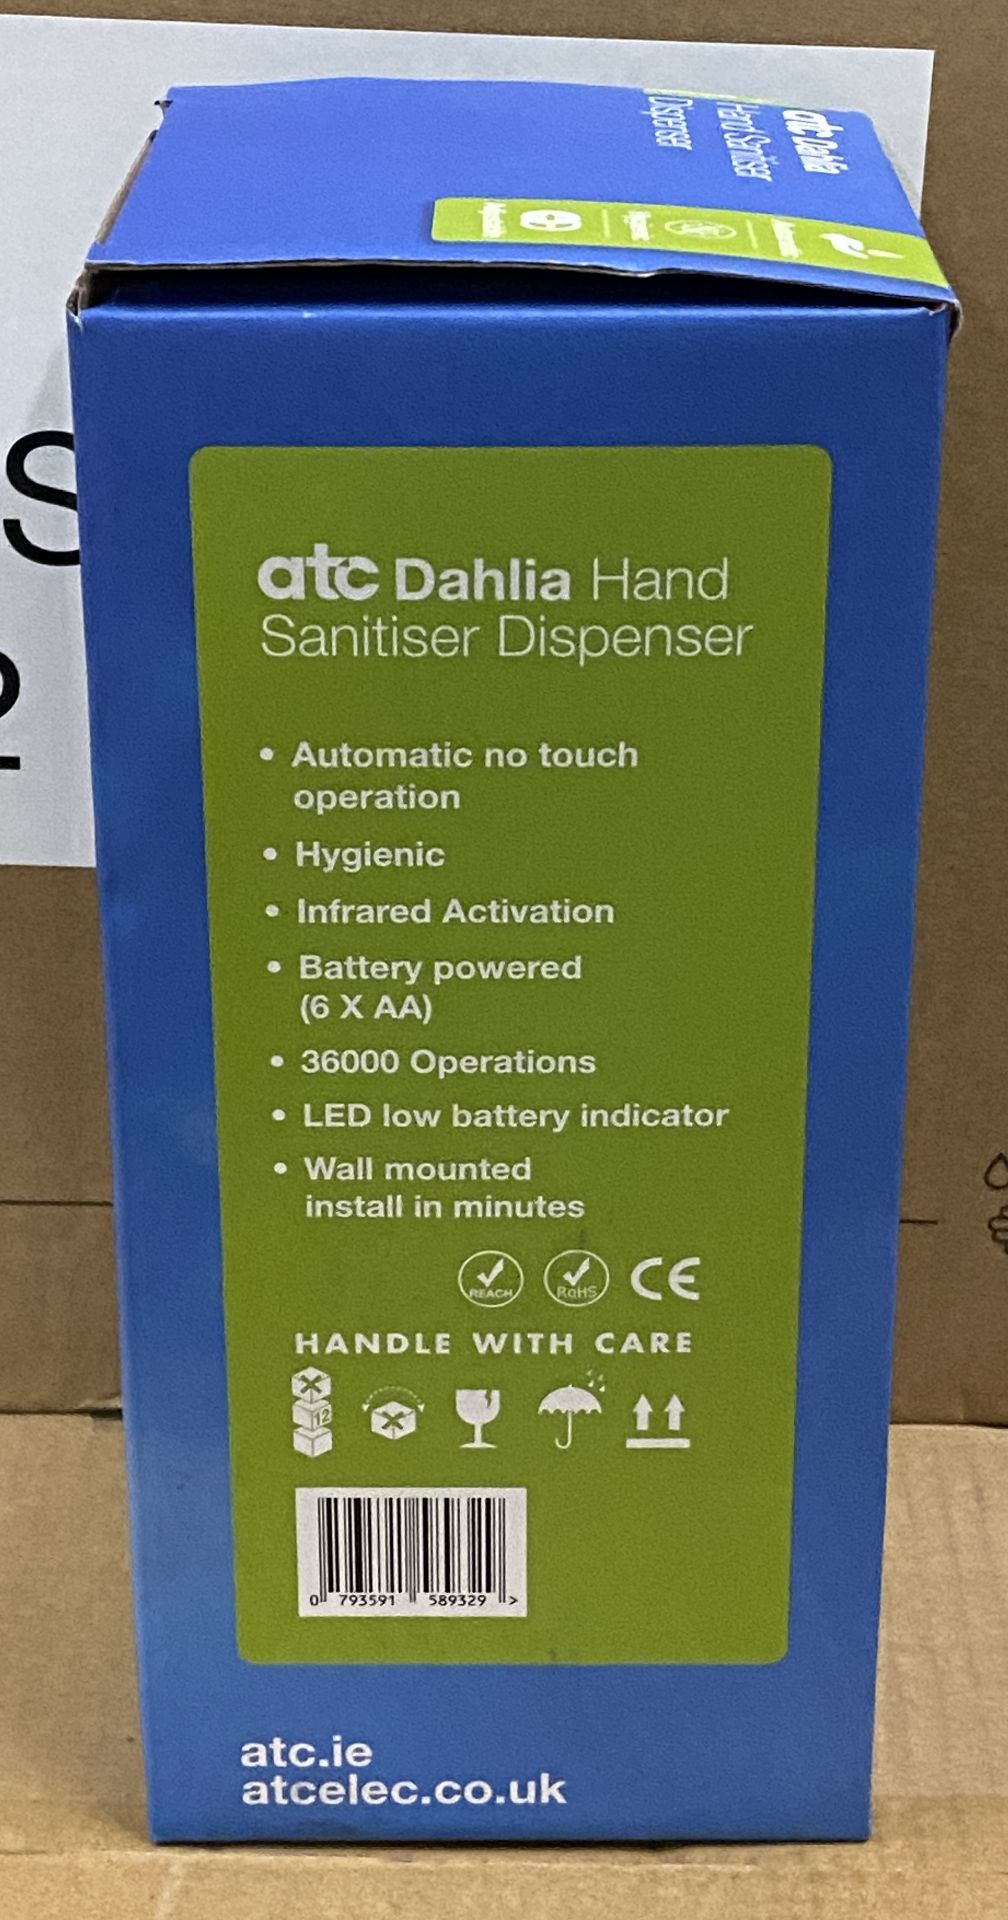 12 x ATC Dahlia Automatic Hand Soap/Sanitiser Dispensers - Boxed retail stock - RRP £59. - Image 2 of 5